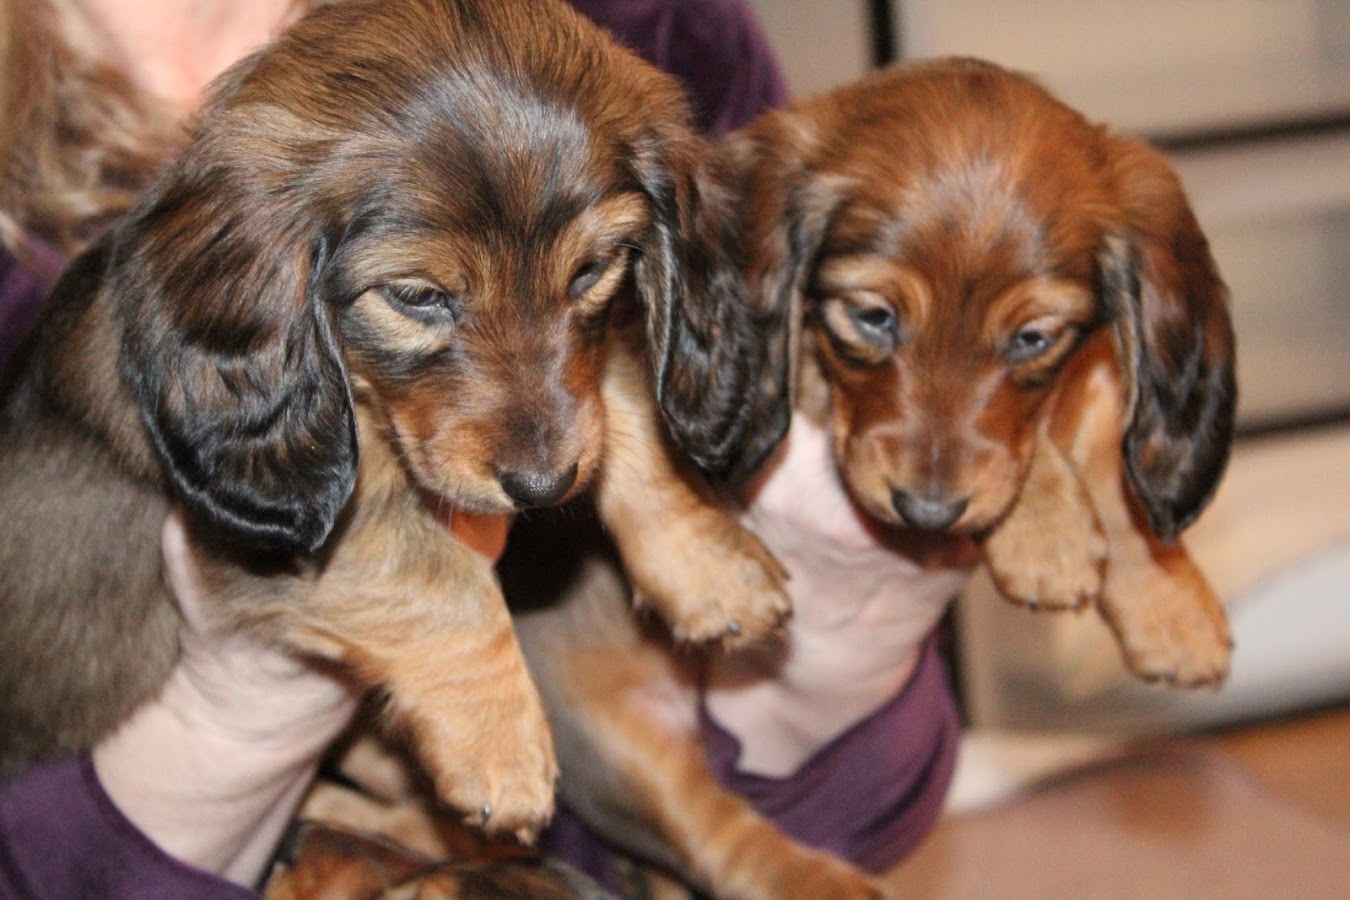 Dachsadore Dachshunds New York Dachsadore Kennels is